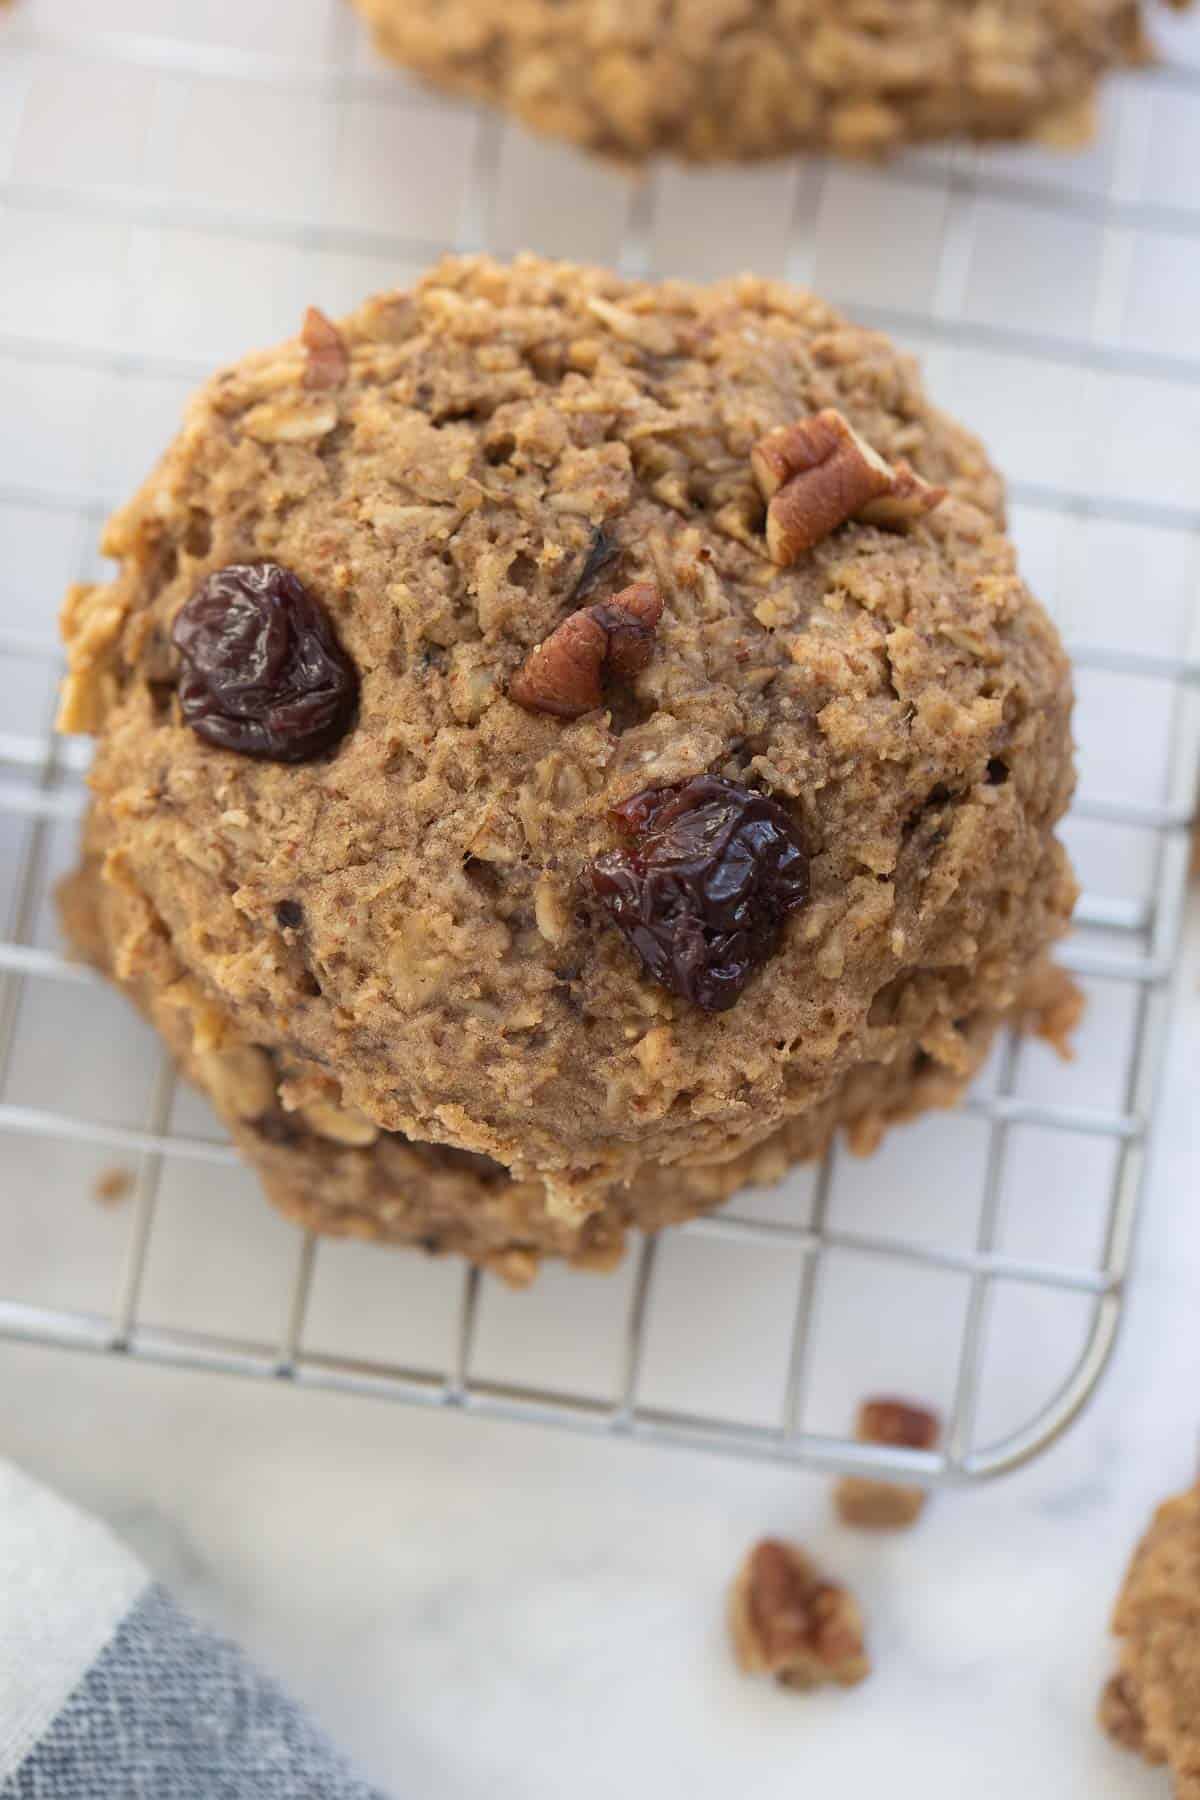 close up image of oatmeal cookie with bananas, raisins, and nuts